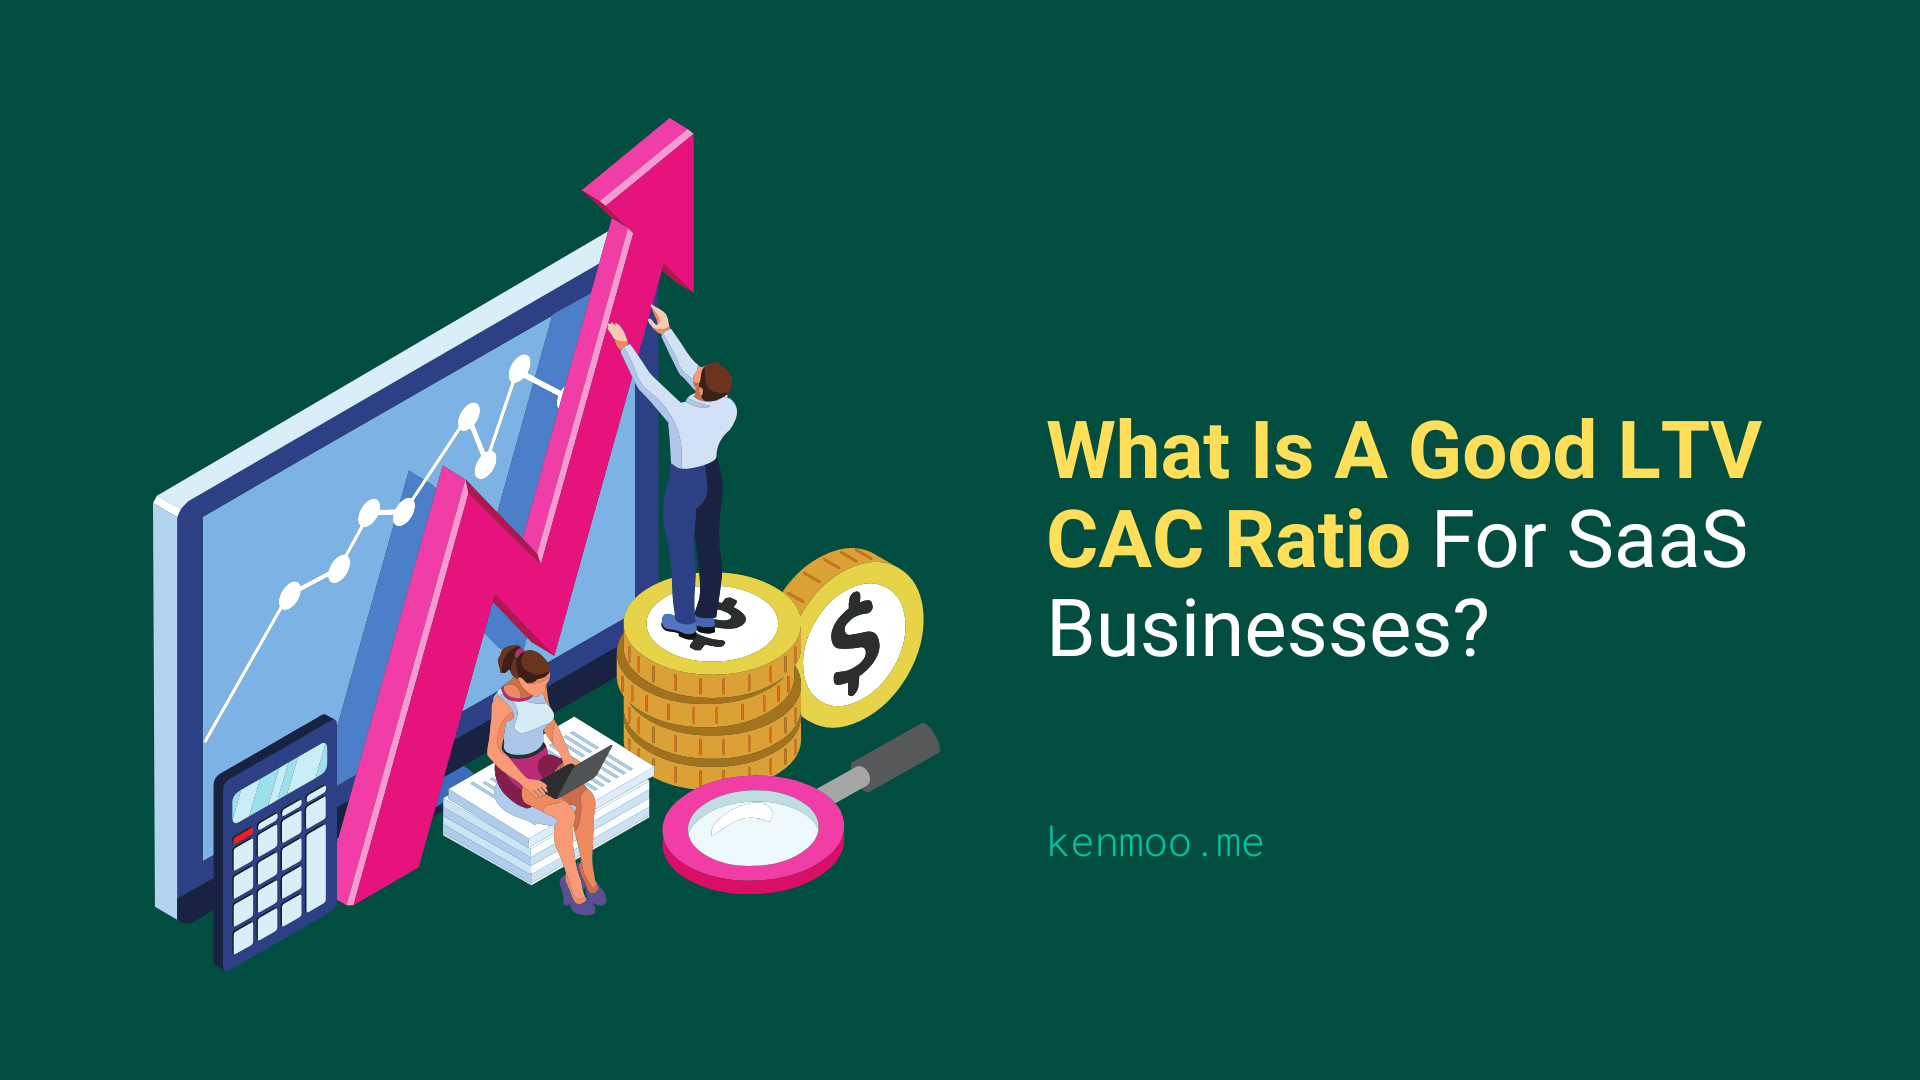 What Is A Good LTV CAC Ratio For SaaS Businesses?